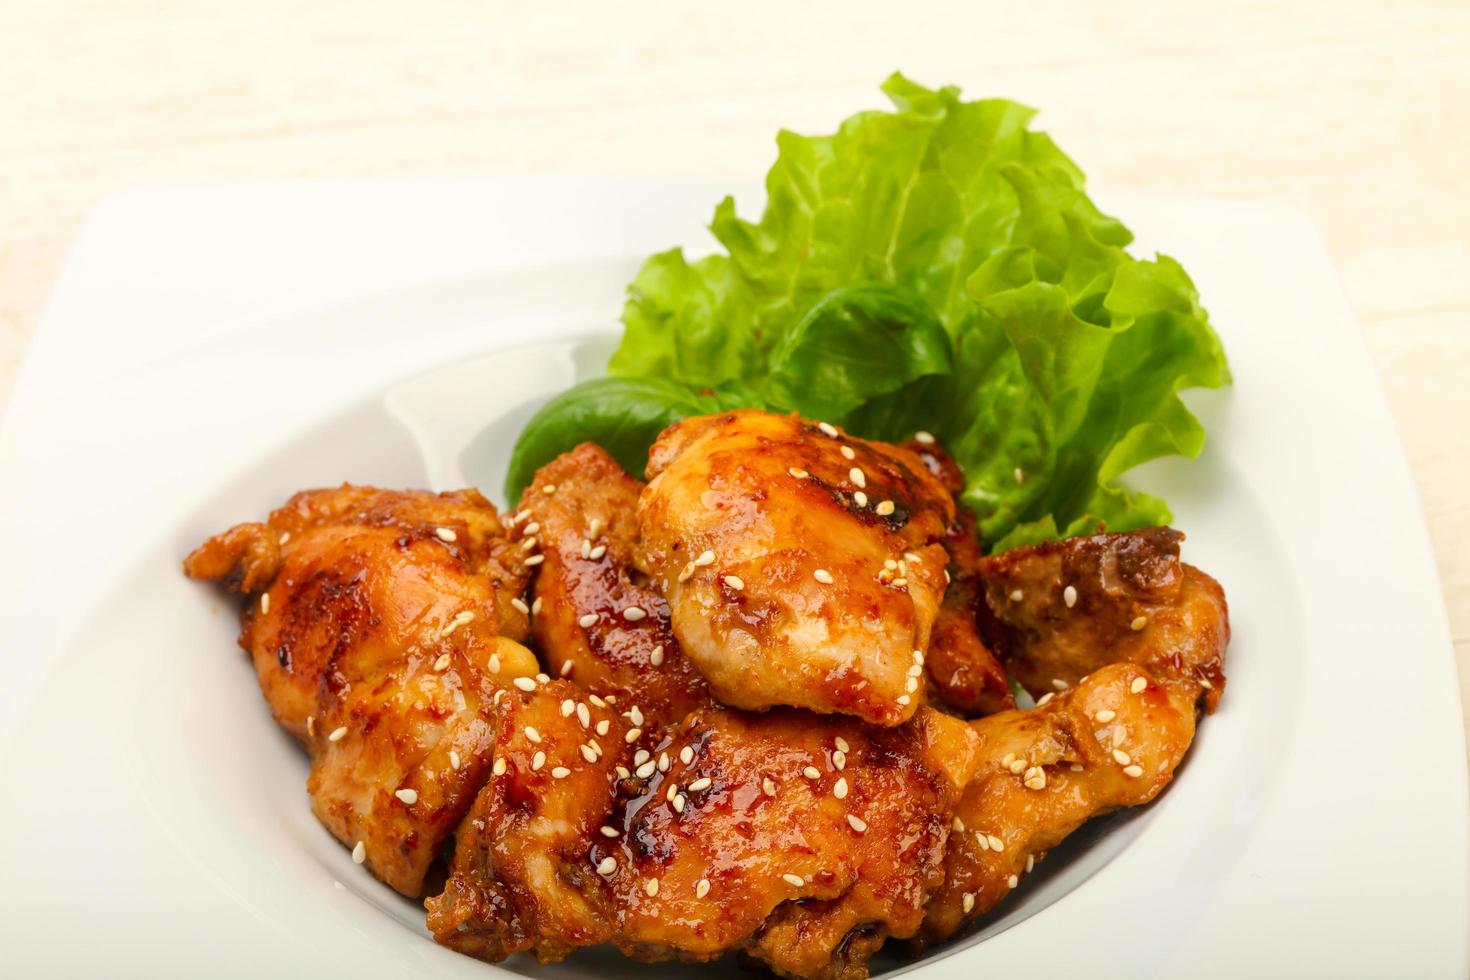 Teriyaki thighs on the plate and wooden background photo